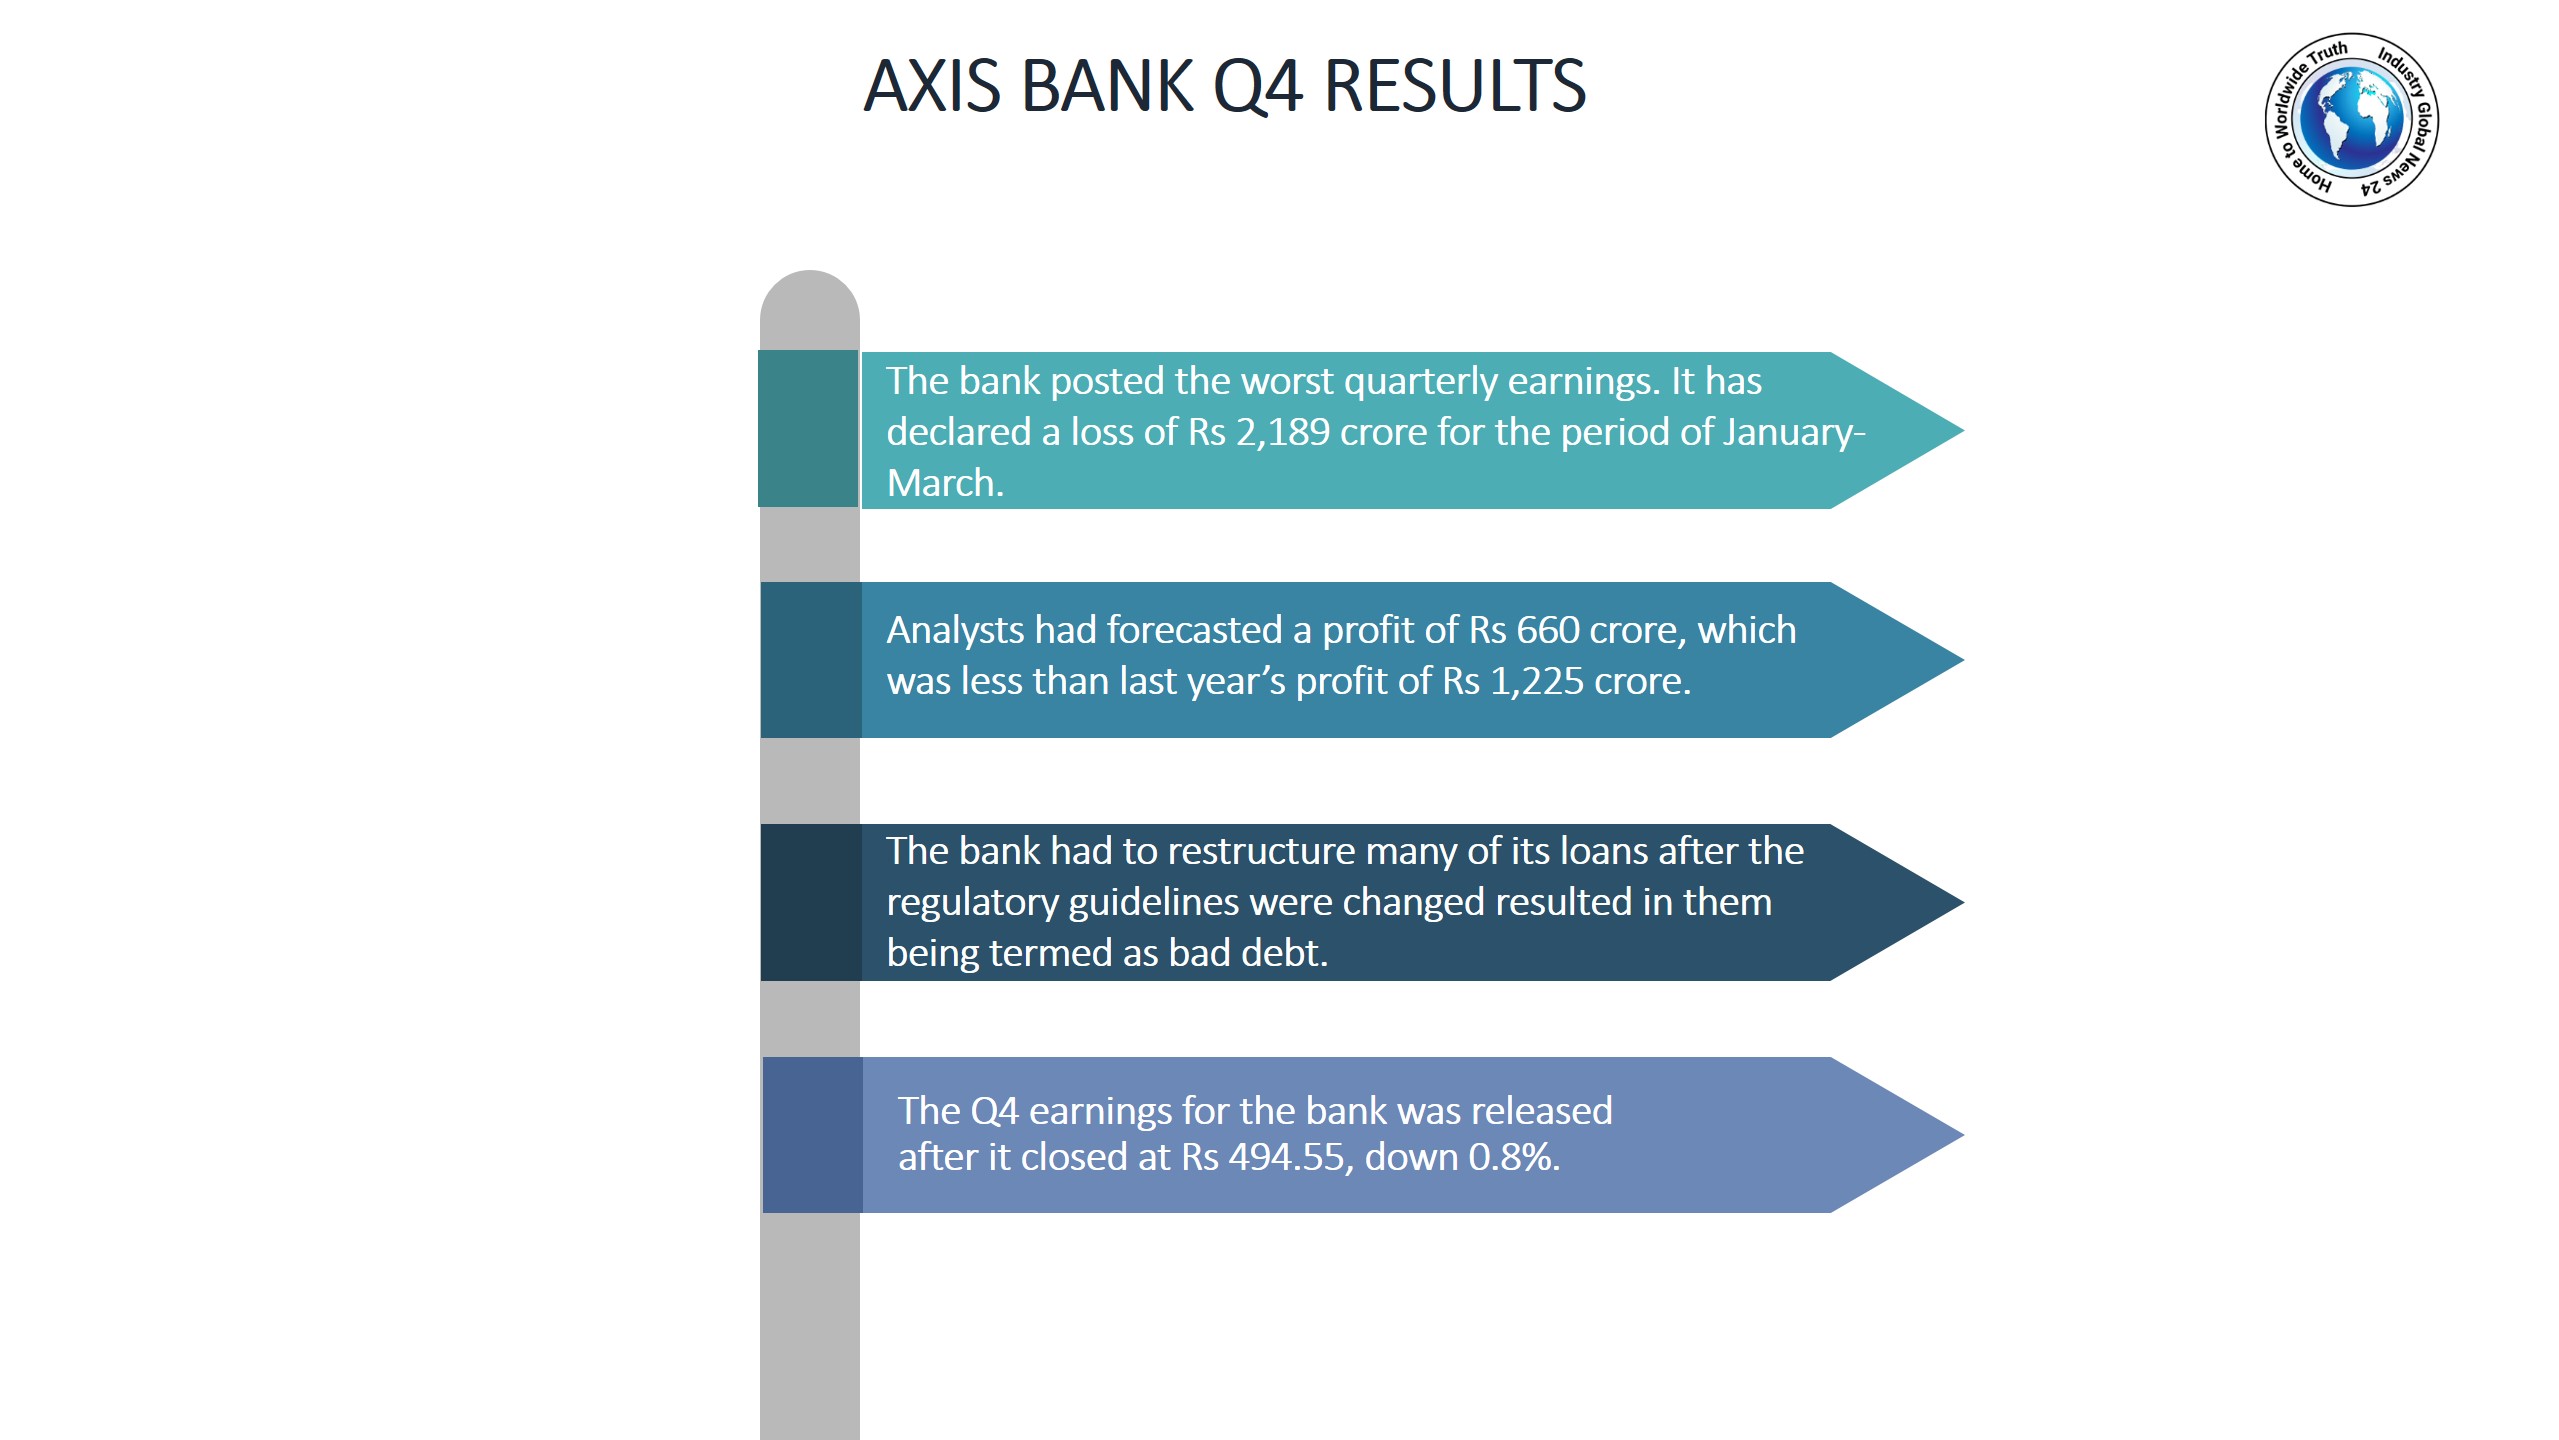 Axis bank Q4 results